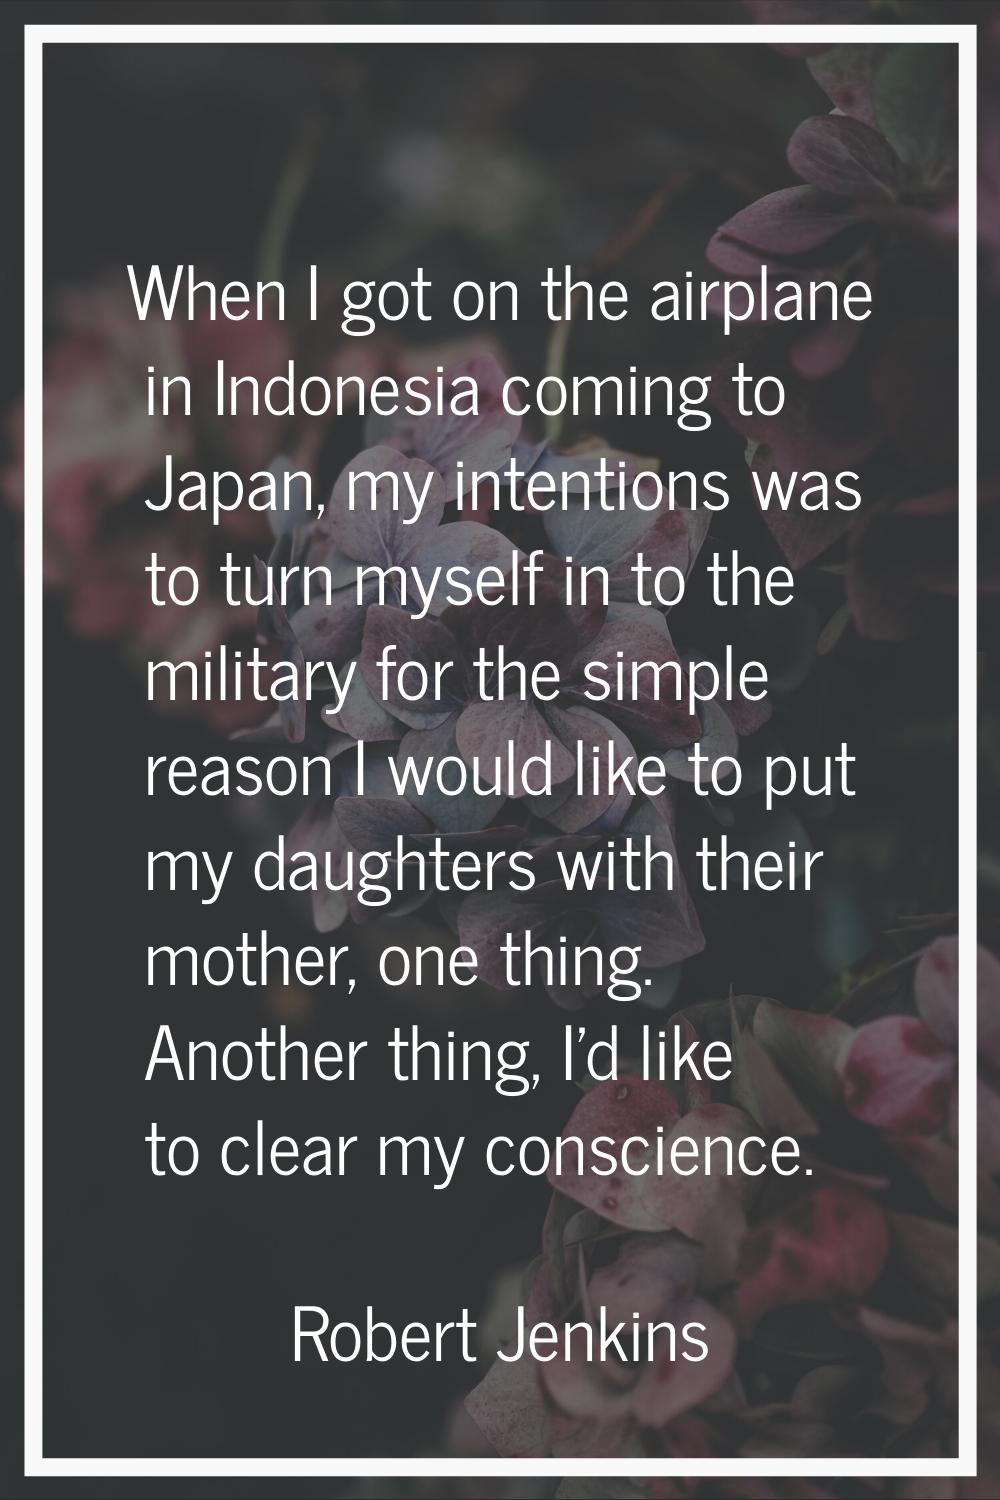 When I got on the airplane in Indonesia coming to Japan, my intentions was to turn myself in to the